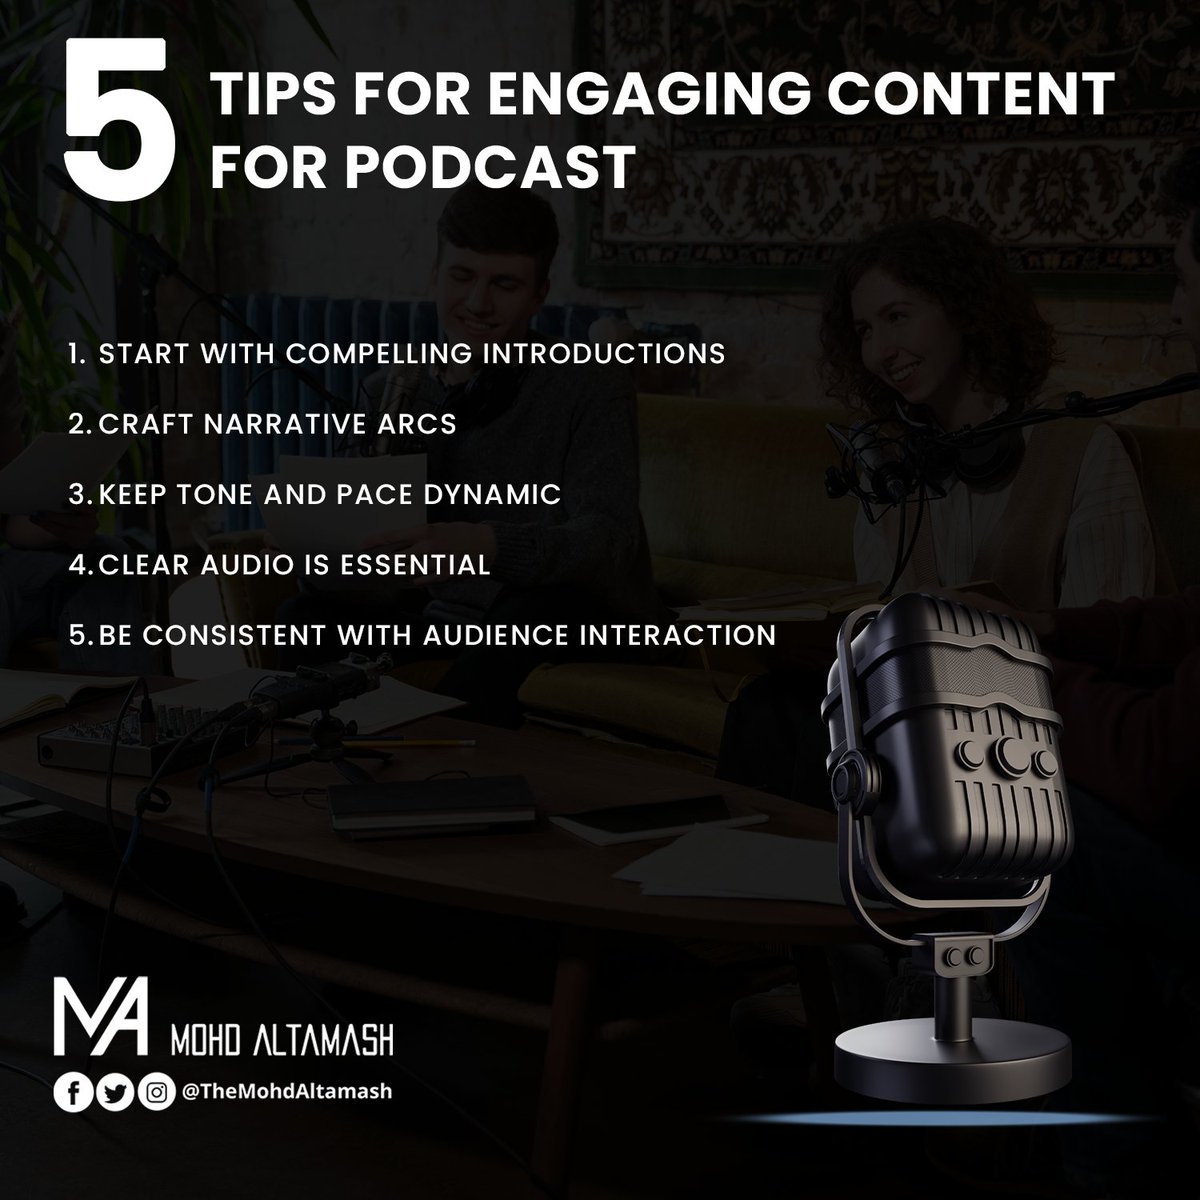 Here are some tips to craft content that keeps listeners hooked.

#PodcastTips #EngagingContent #PodcastStrategy #AudioStorytelling #AudienceEngagement #PodcastPromotion #QualityAudio #ListenerFeedback #ContentCreators #PodcastersUnite #DigitalStorytelling #KeepPodcasting